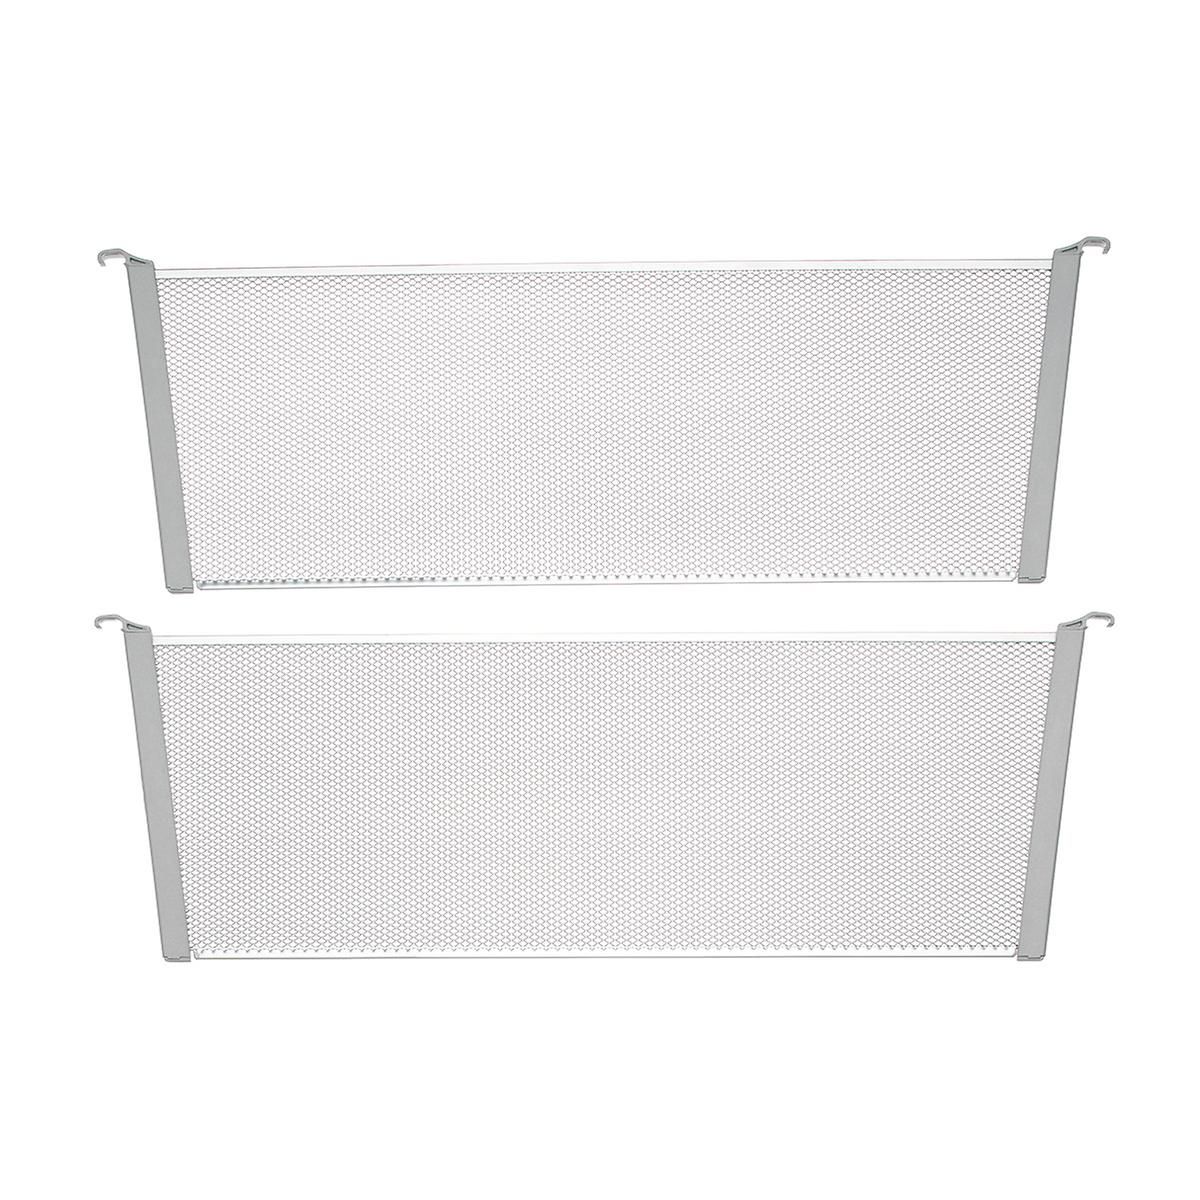 Elfa Platinum 20-3/4" Mesh Drawer Dividers | The Container Store